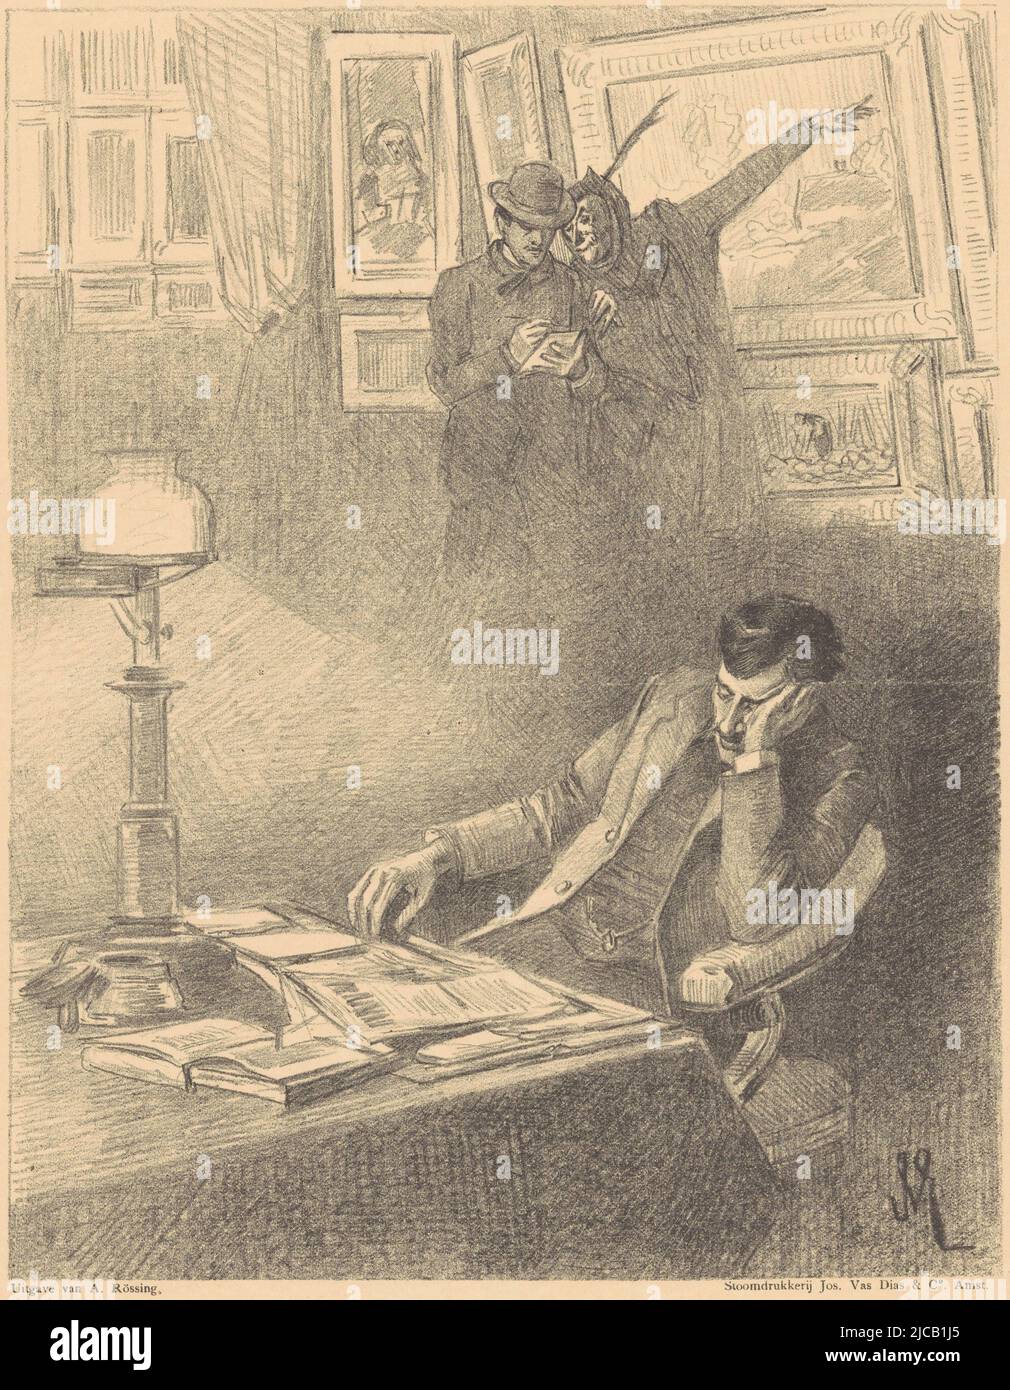 A man seated at a reading table His head is leaning on his hand In the background two men looking at paintings together One of them is making notes on a sheet of paper Beneath the whole a text by Azerbaijani poet Mirza Schaffy, New Year's Eve reverie of a young art critic original , print maker: Jan van Essen, (mentioned on object), printer: Jos. Vas Dias & Co., (mentioned on object), publisher: A. Rössing, (mentioned on object), 1888, paper, h 312 mm × w 230 mm Stock Photo